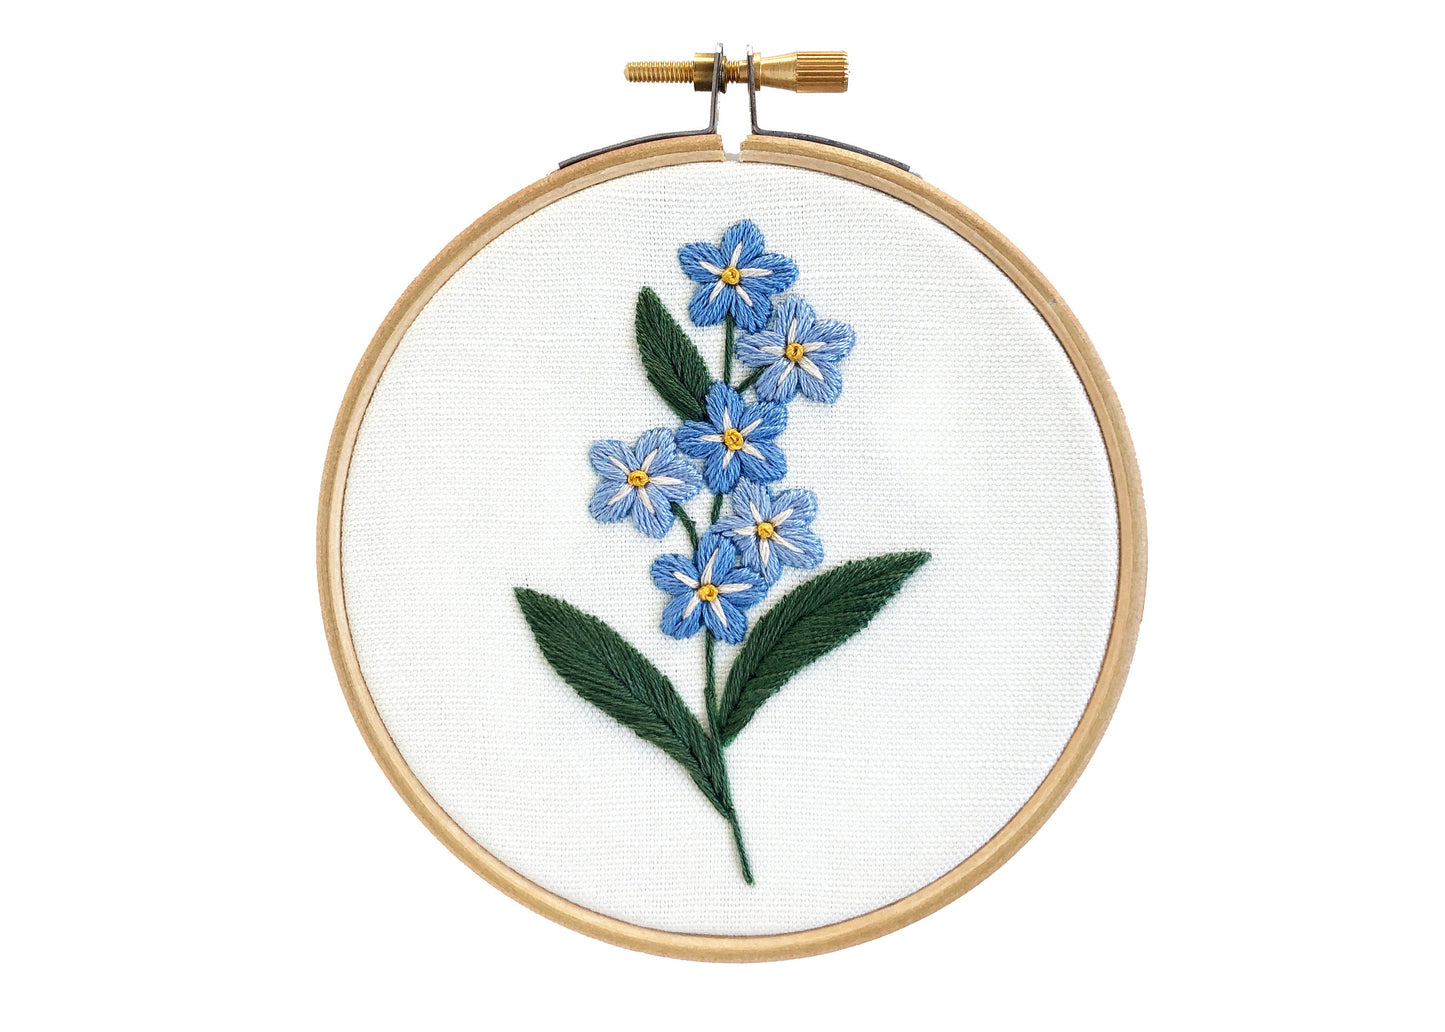 Forget Me Not Embroidery Kit, Botanical Embroidery, Beginner embroidery pattern, Wildflower Embroidery, needlepoint kit, printed pattern